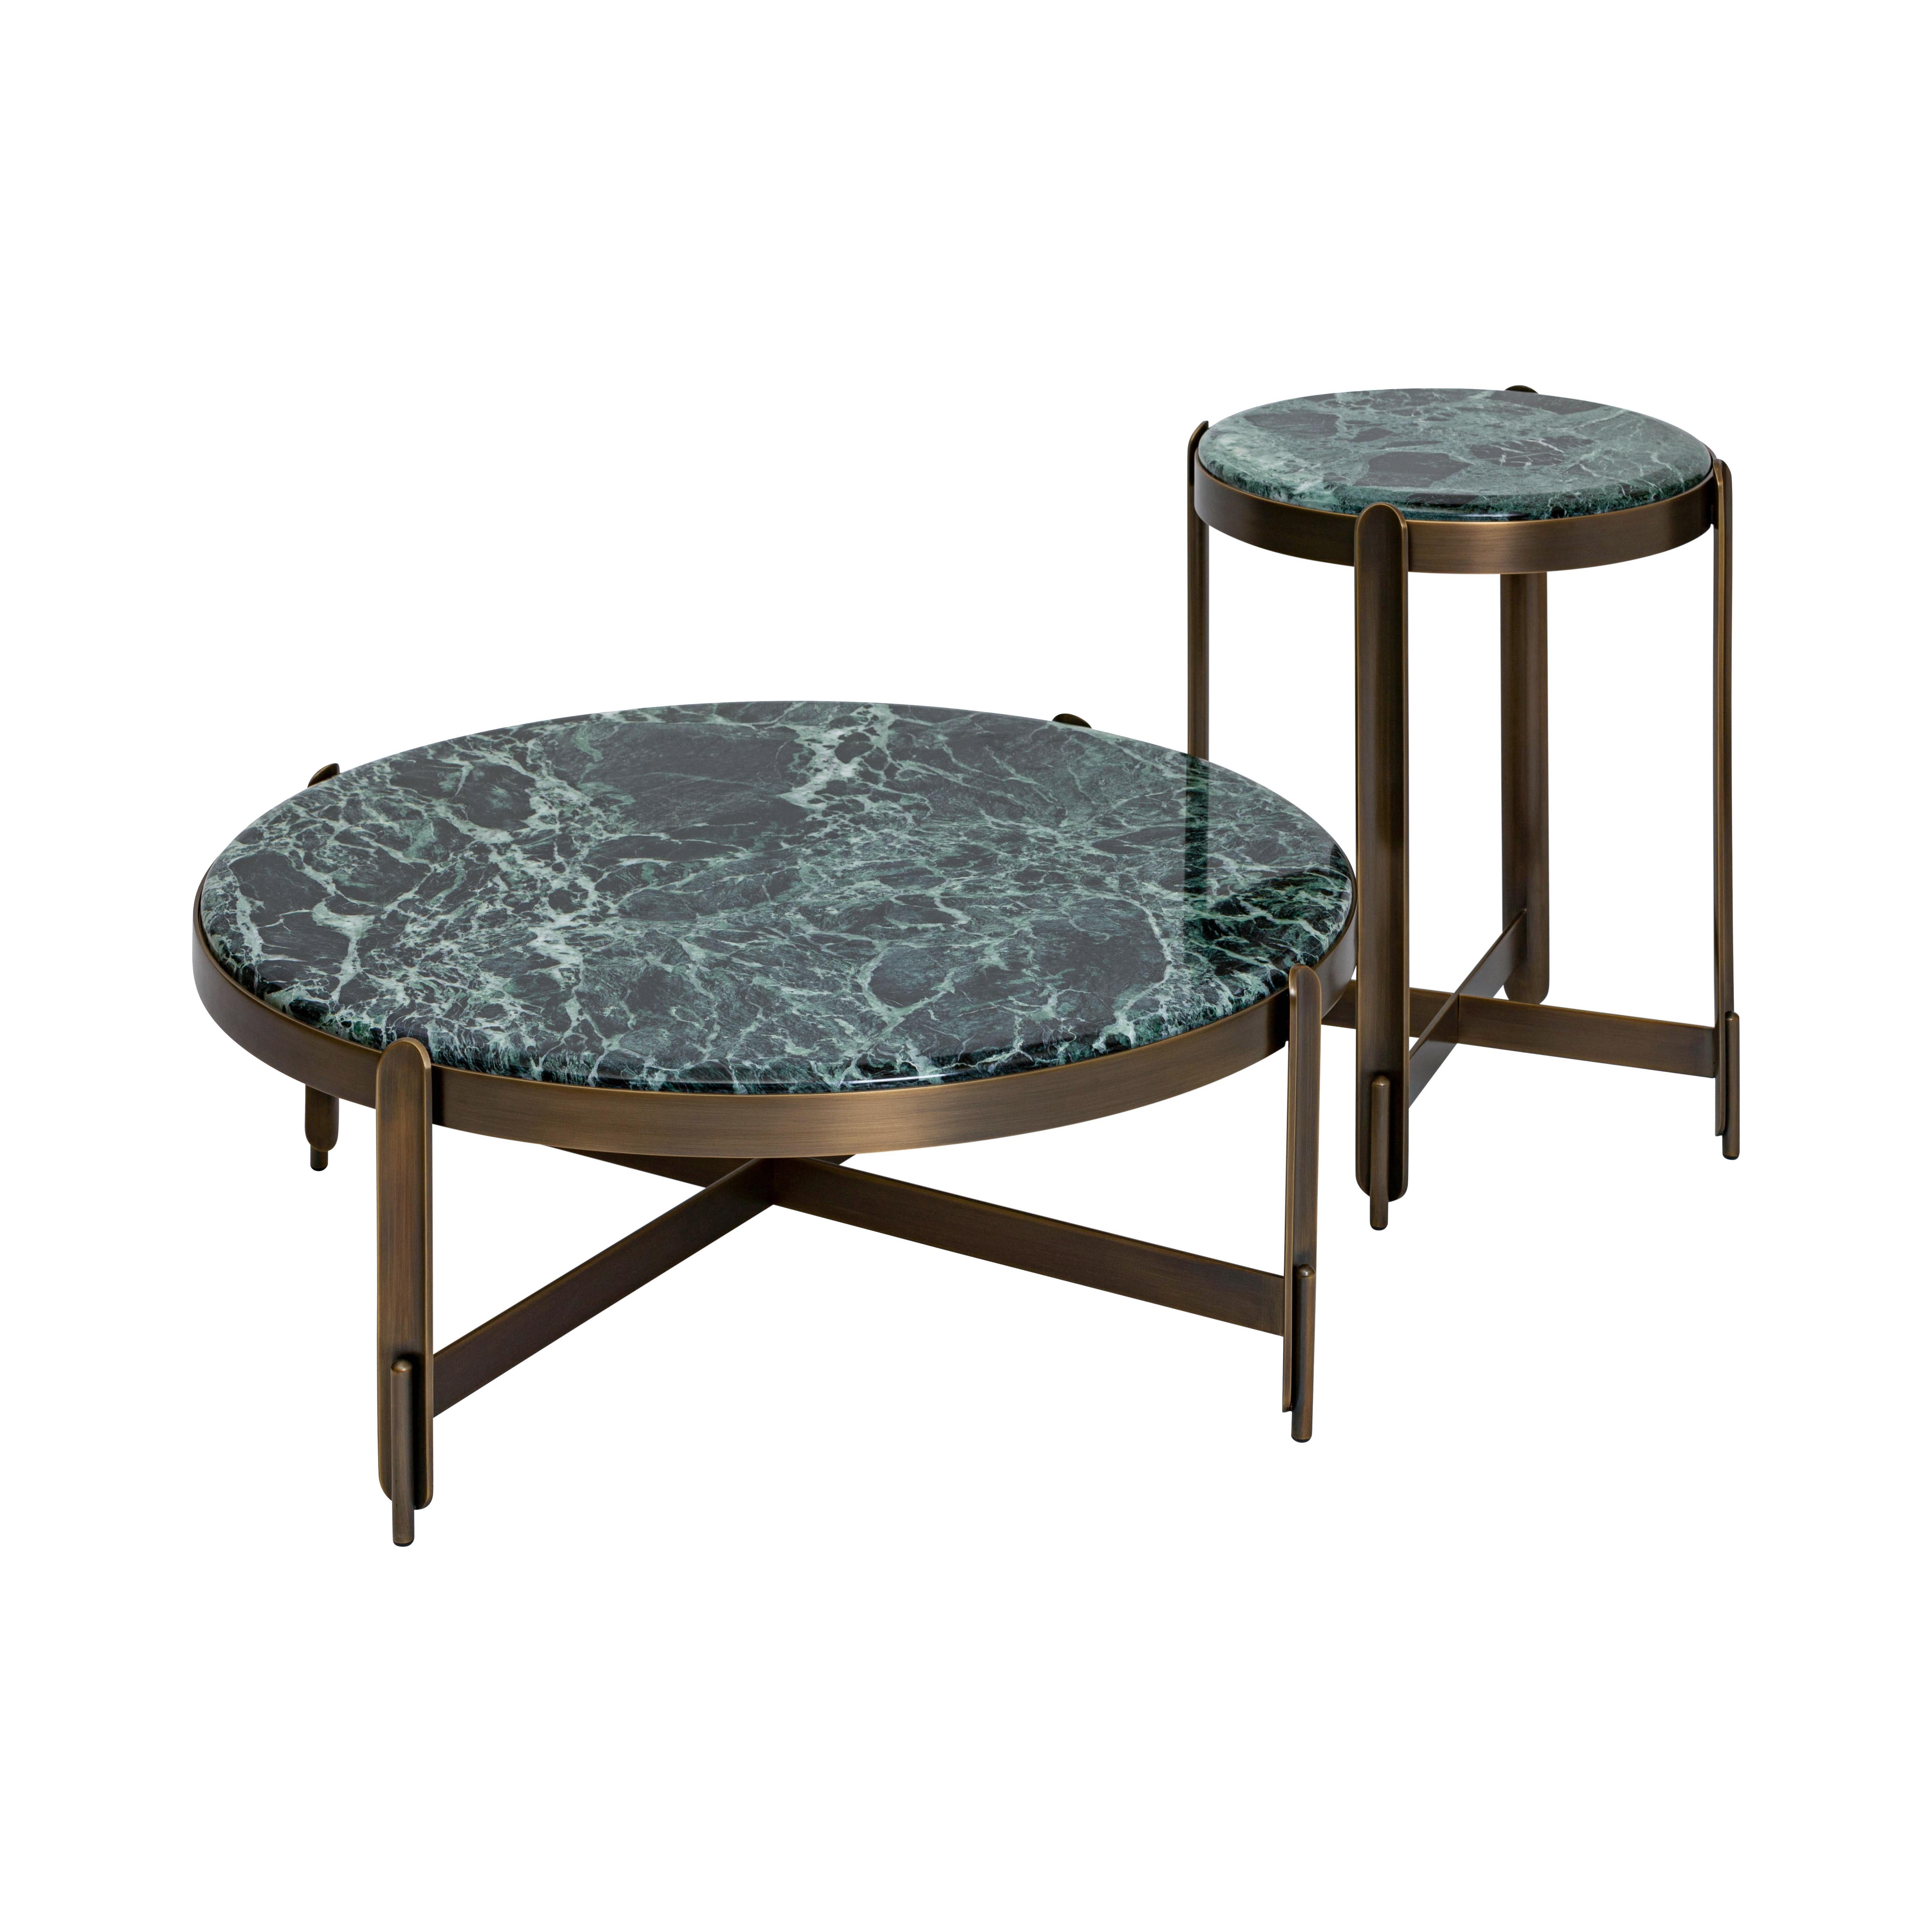 Contemporary 21st Century Art Déco Elie Saab Maison Alpine Green Bronzed Side Table, Italy For Sale